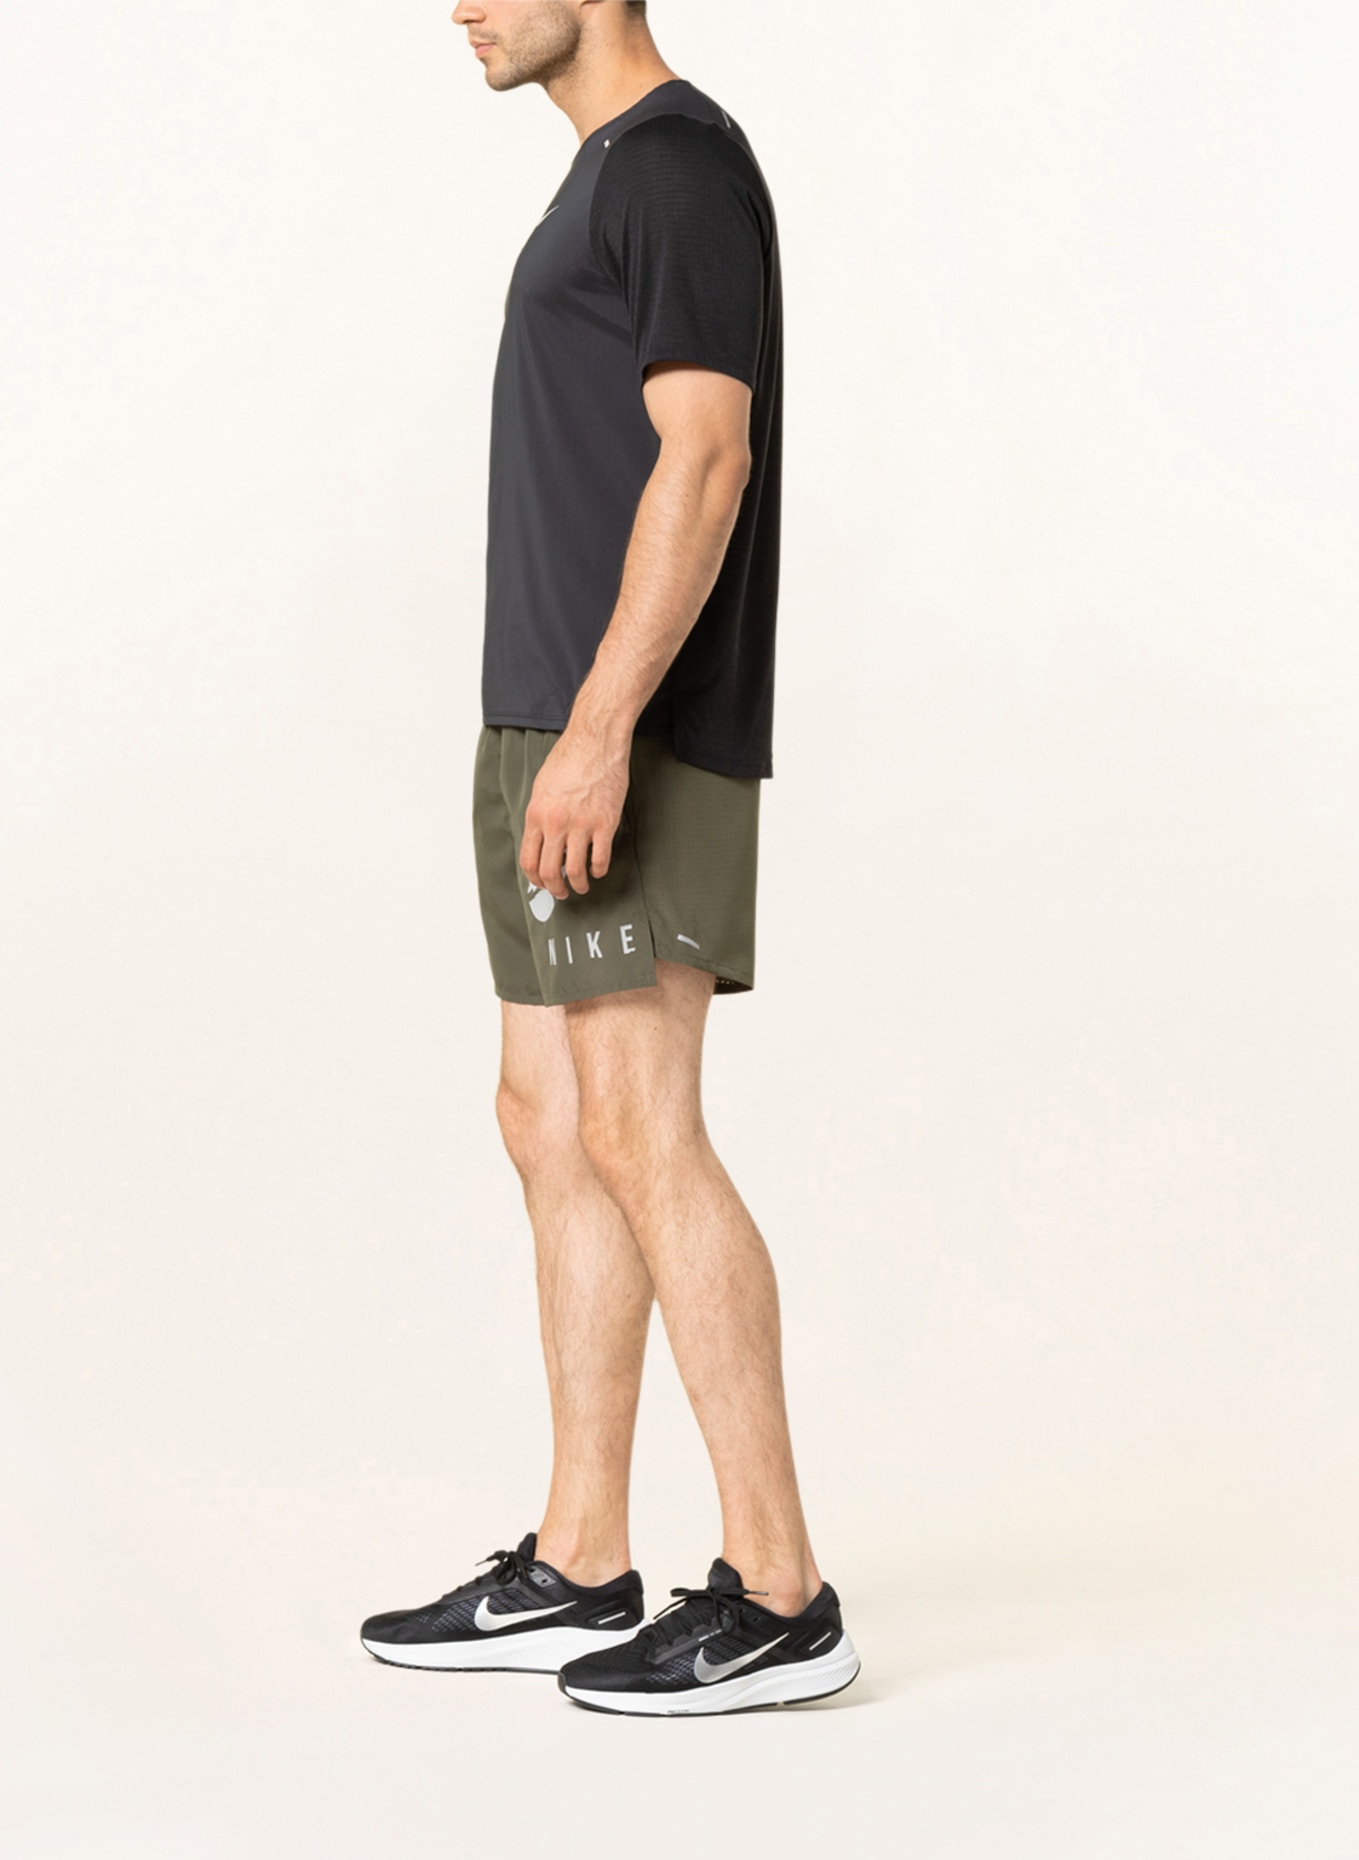 Nike 2-in-1 running shorts DRI-FIT CHALLENGER RUN DIVISION, Color: OLIVE (Image 4)